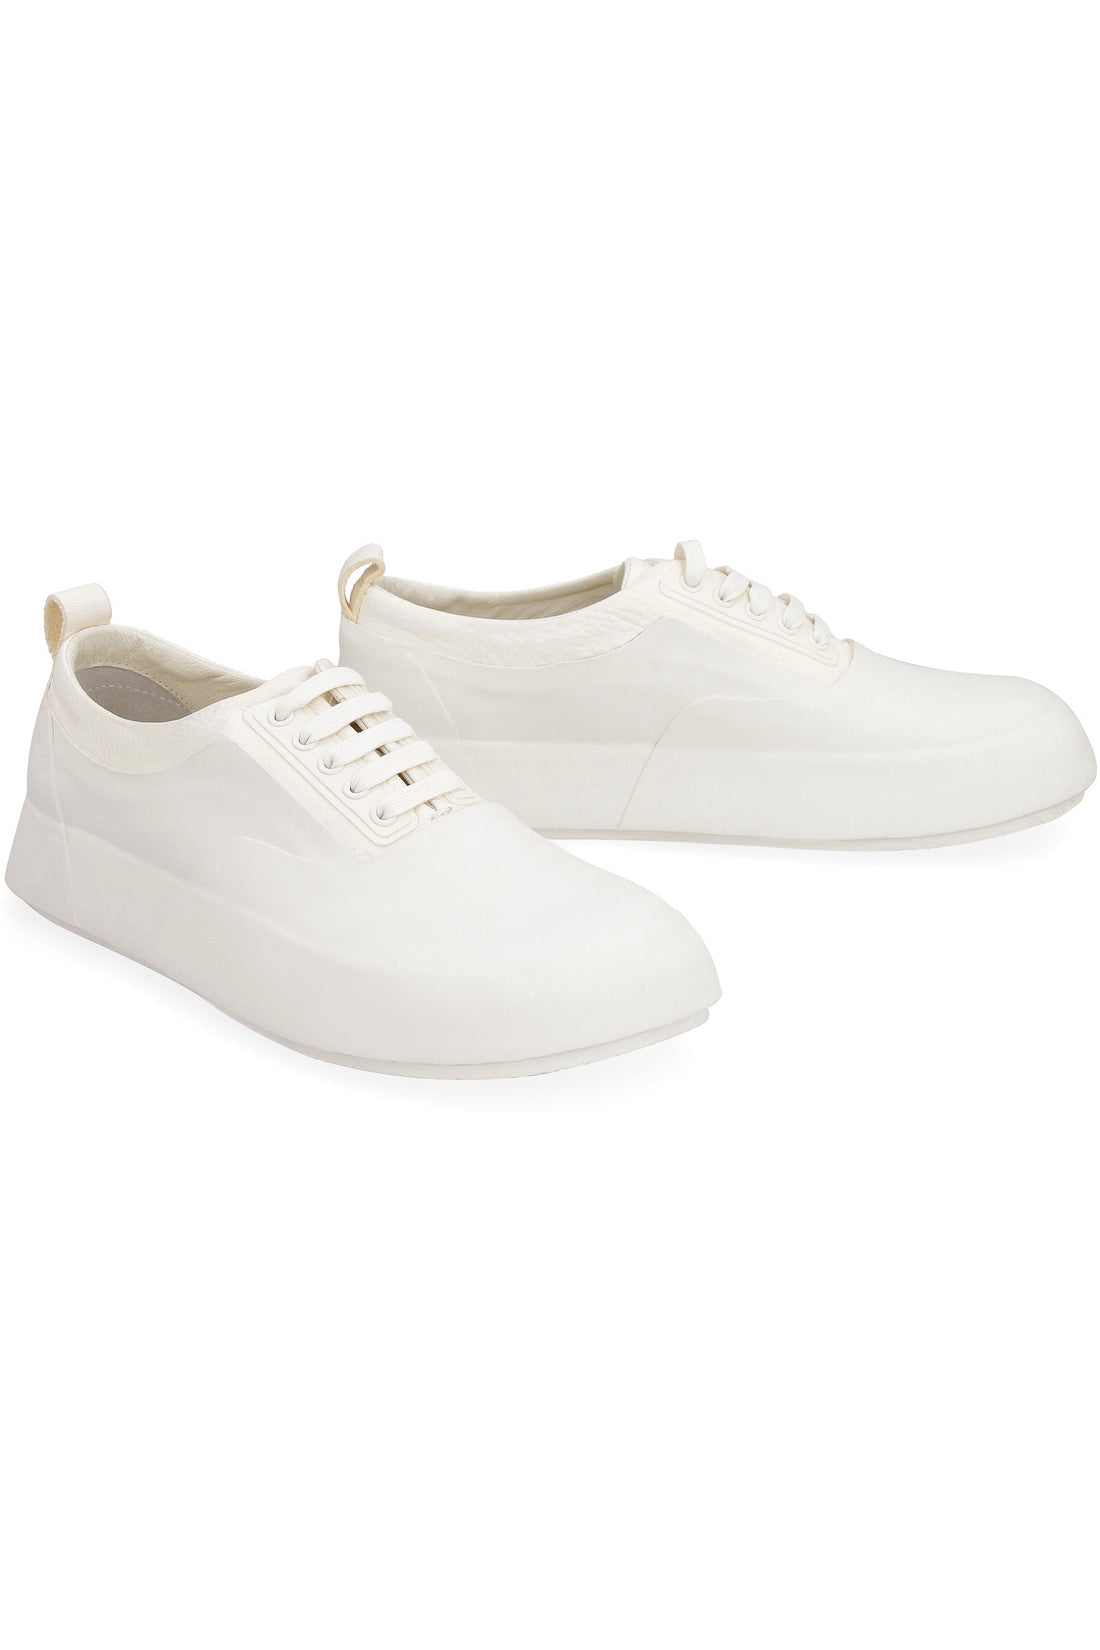 AMBUSH-OUTLET-SALE-Rubber and leather low-top sneakers-ARCHIVIST